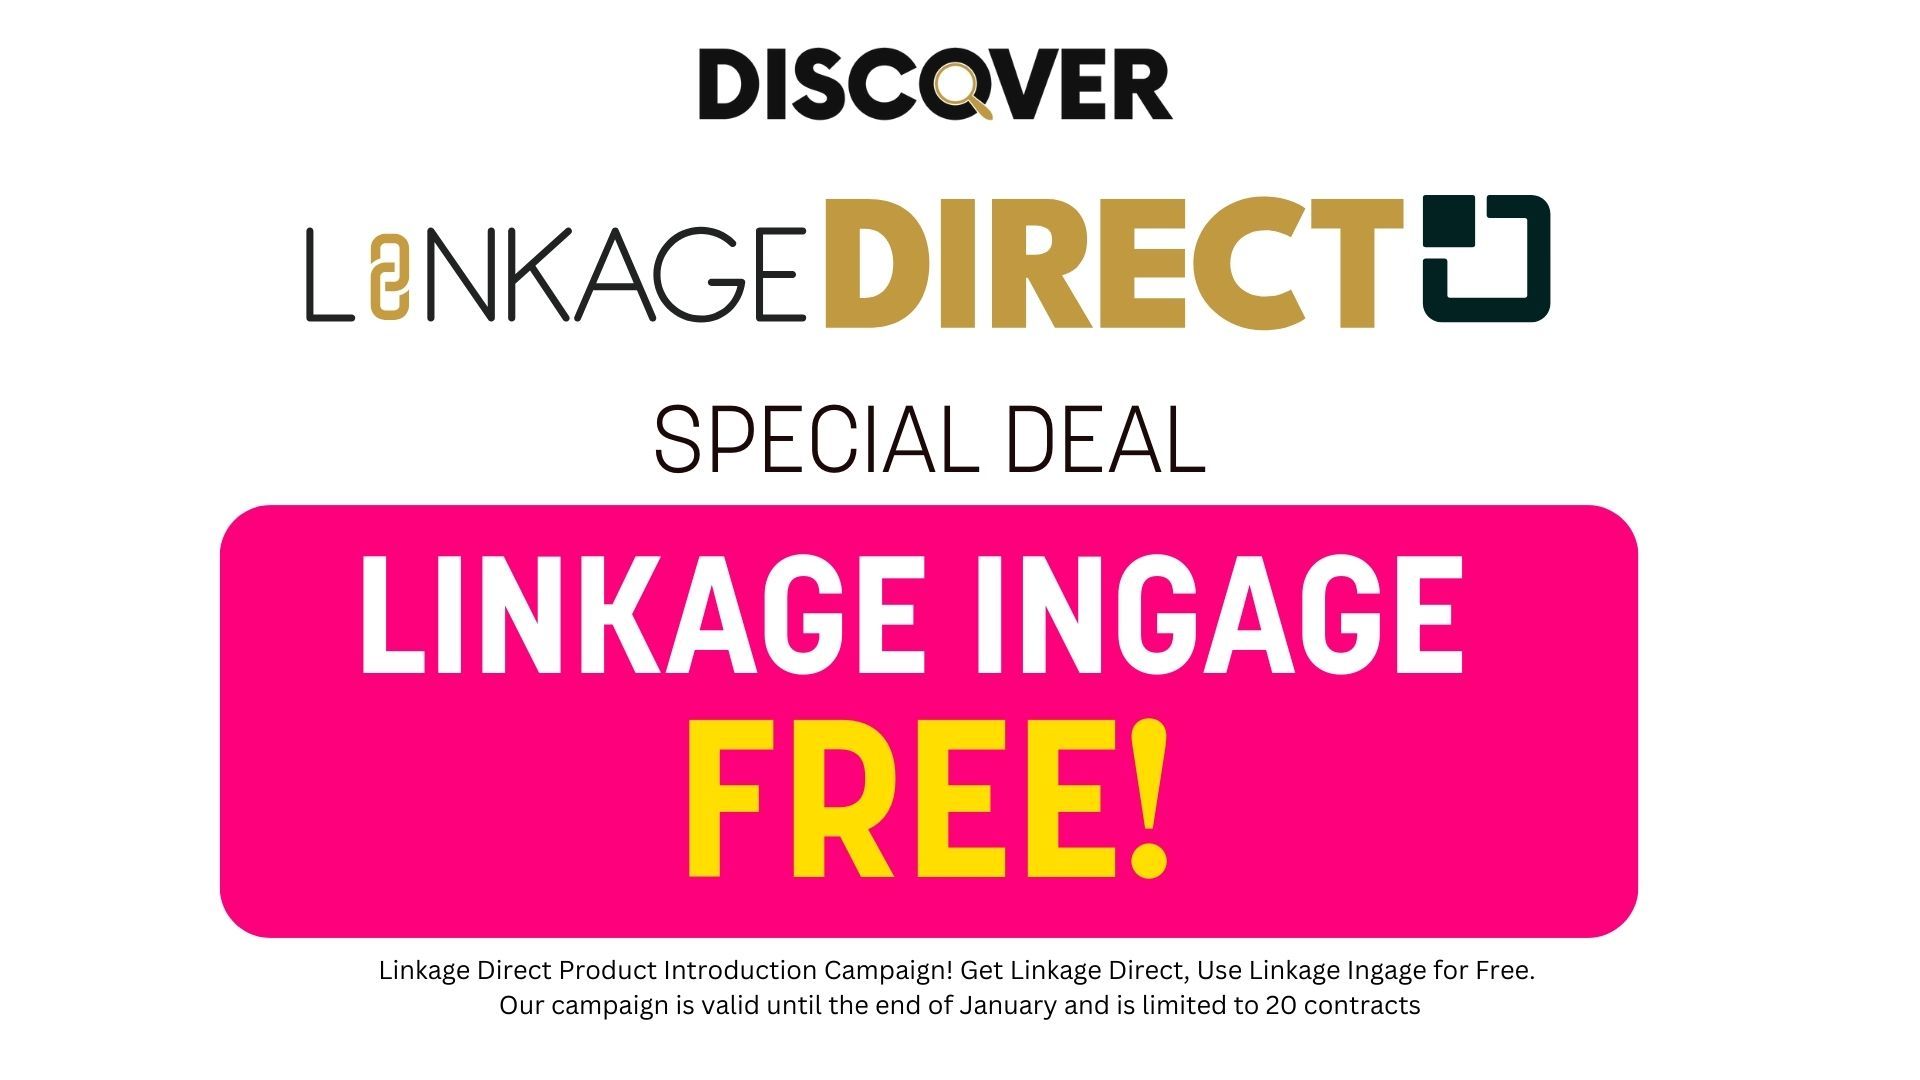 Boost your hotel's digital presence & loyalty with Linkage Direct